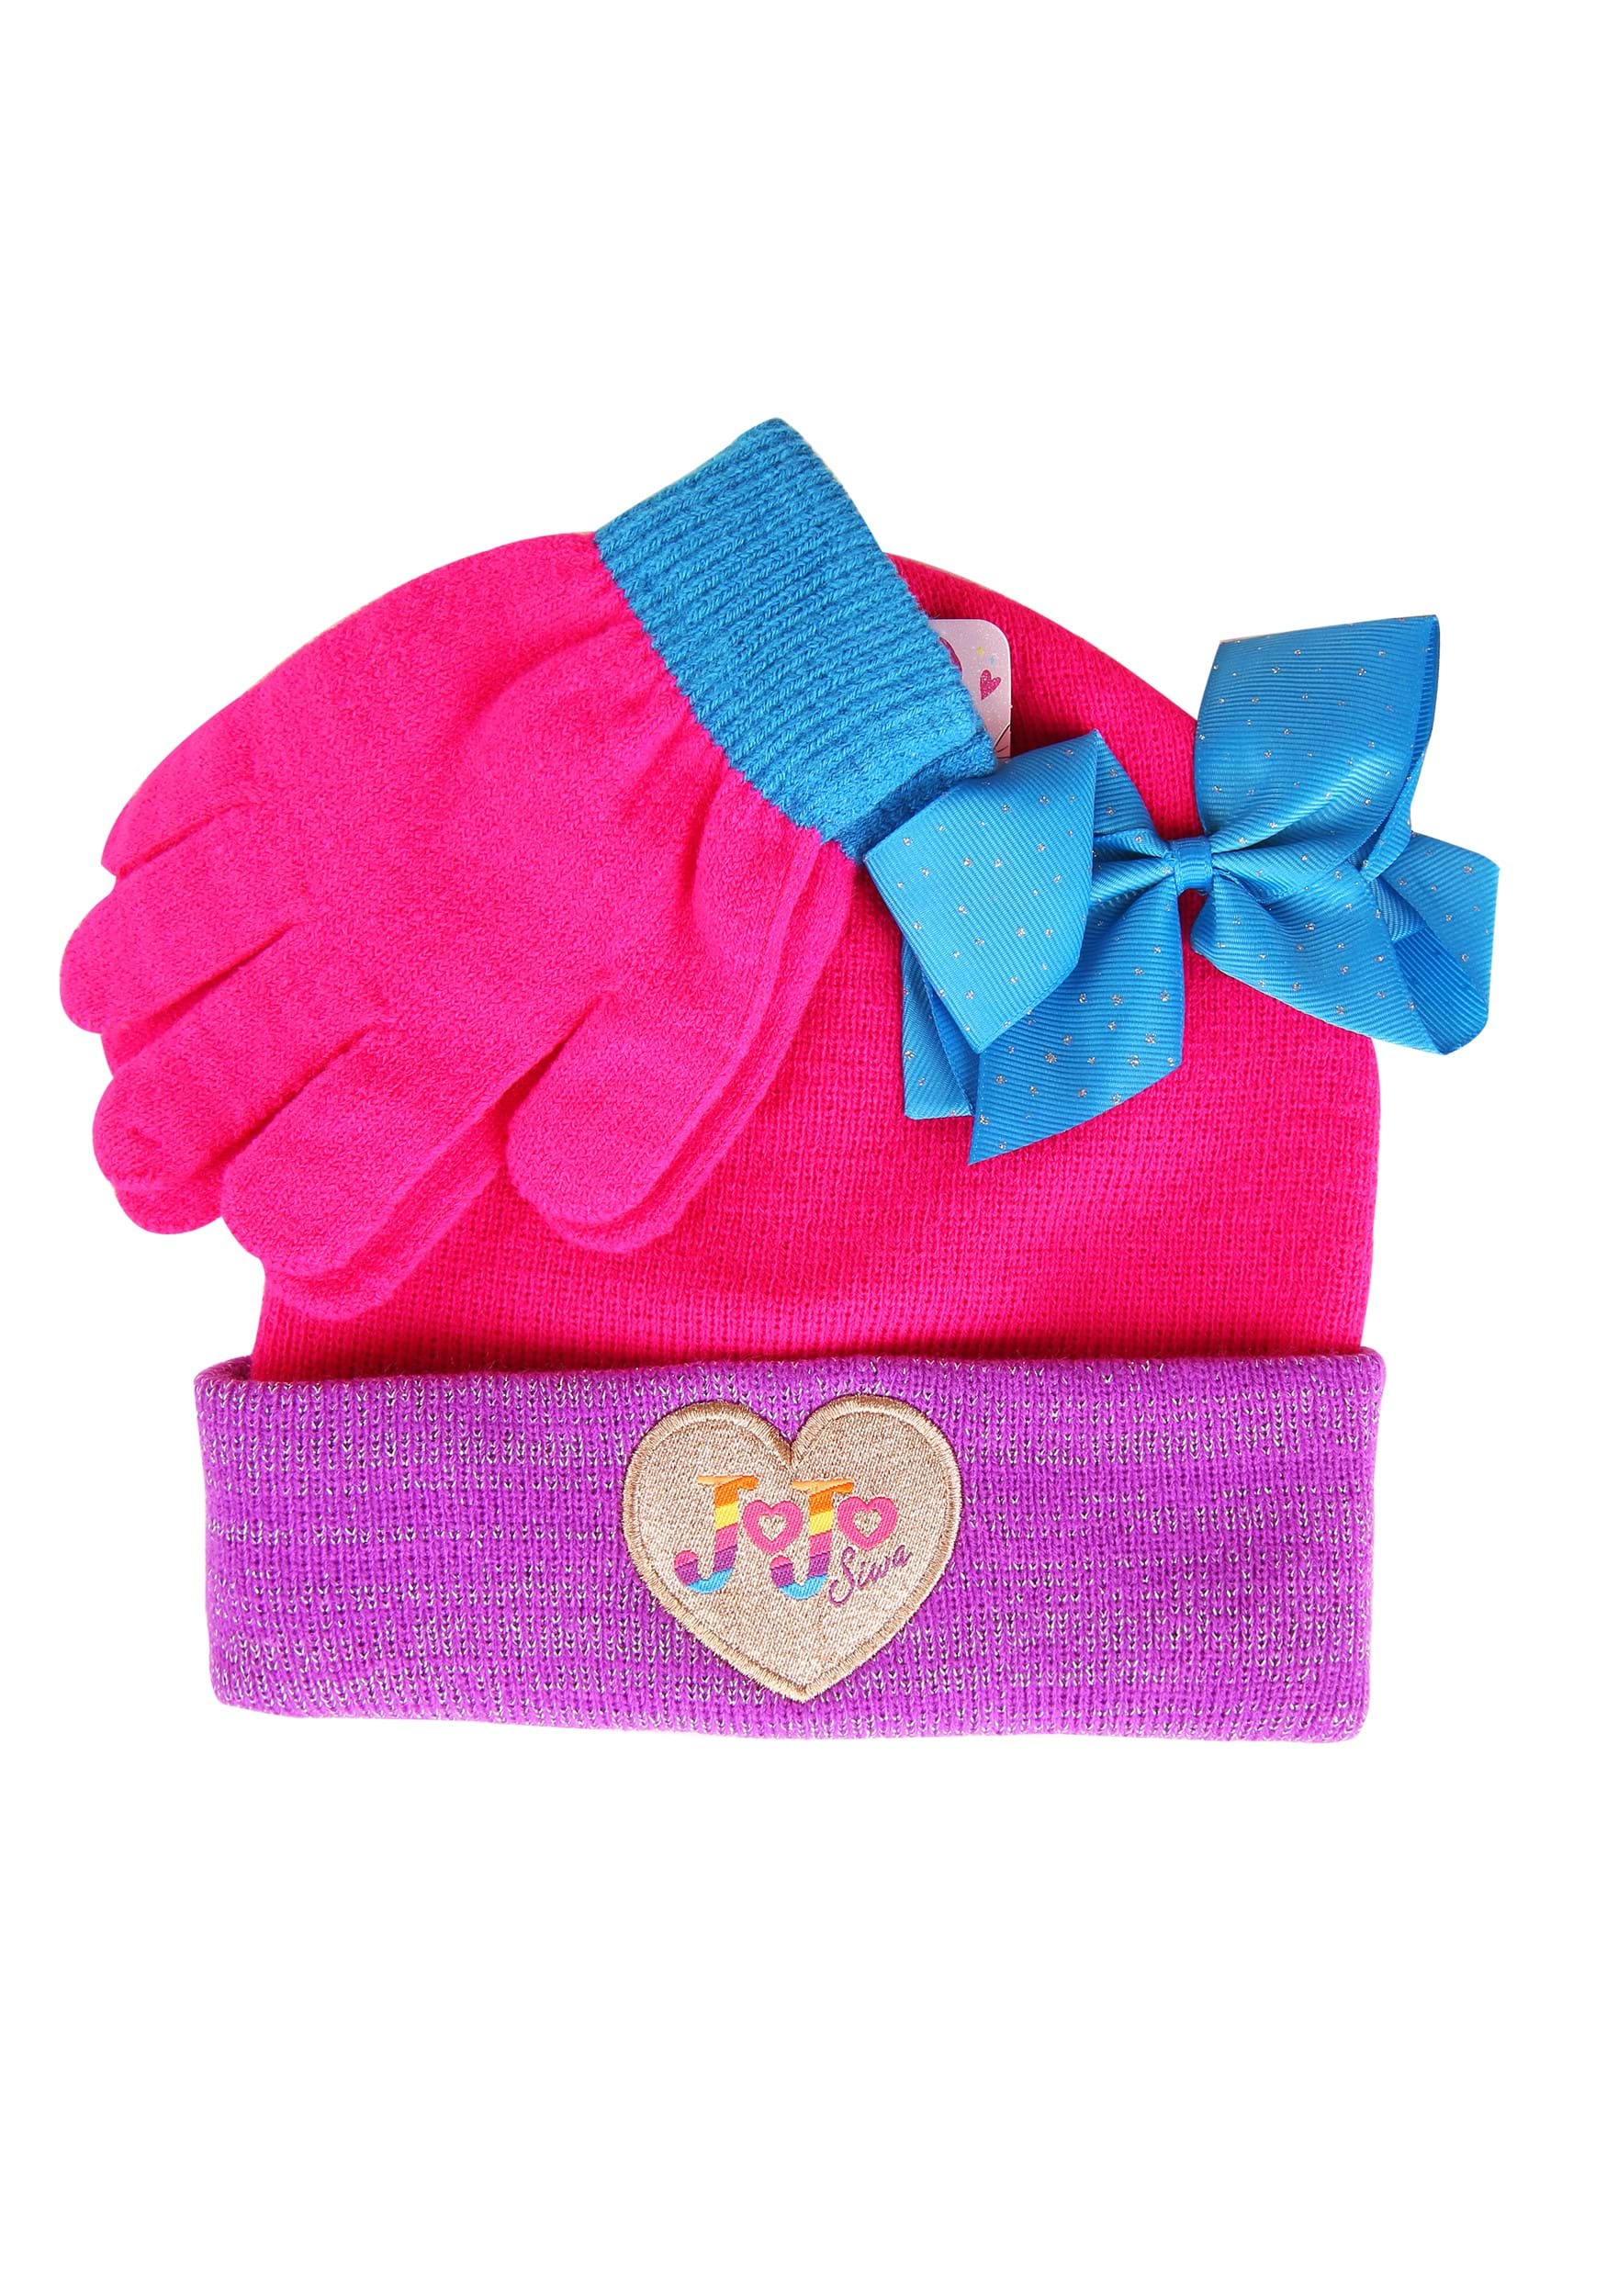 2 Pc JoJo Siwa Kid’s Winter Hat and Snow Gloves for Girls and Toddlers Set Cute and Warm Outdoor Wear with Pom Pom Beanie 